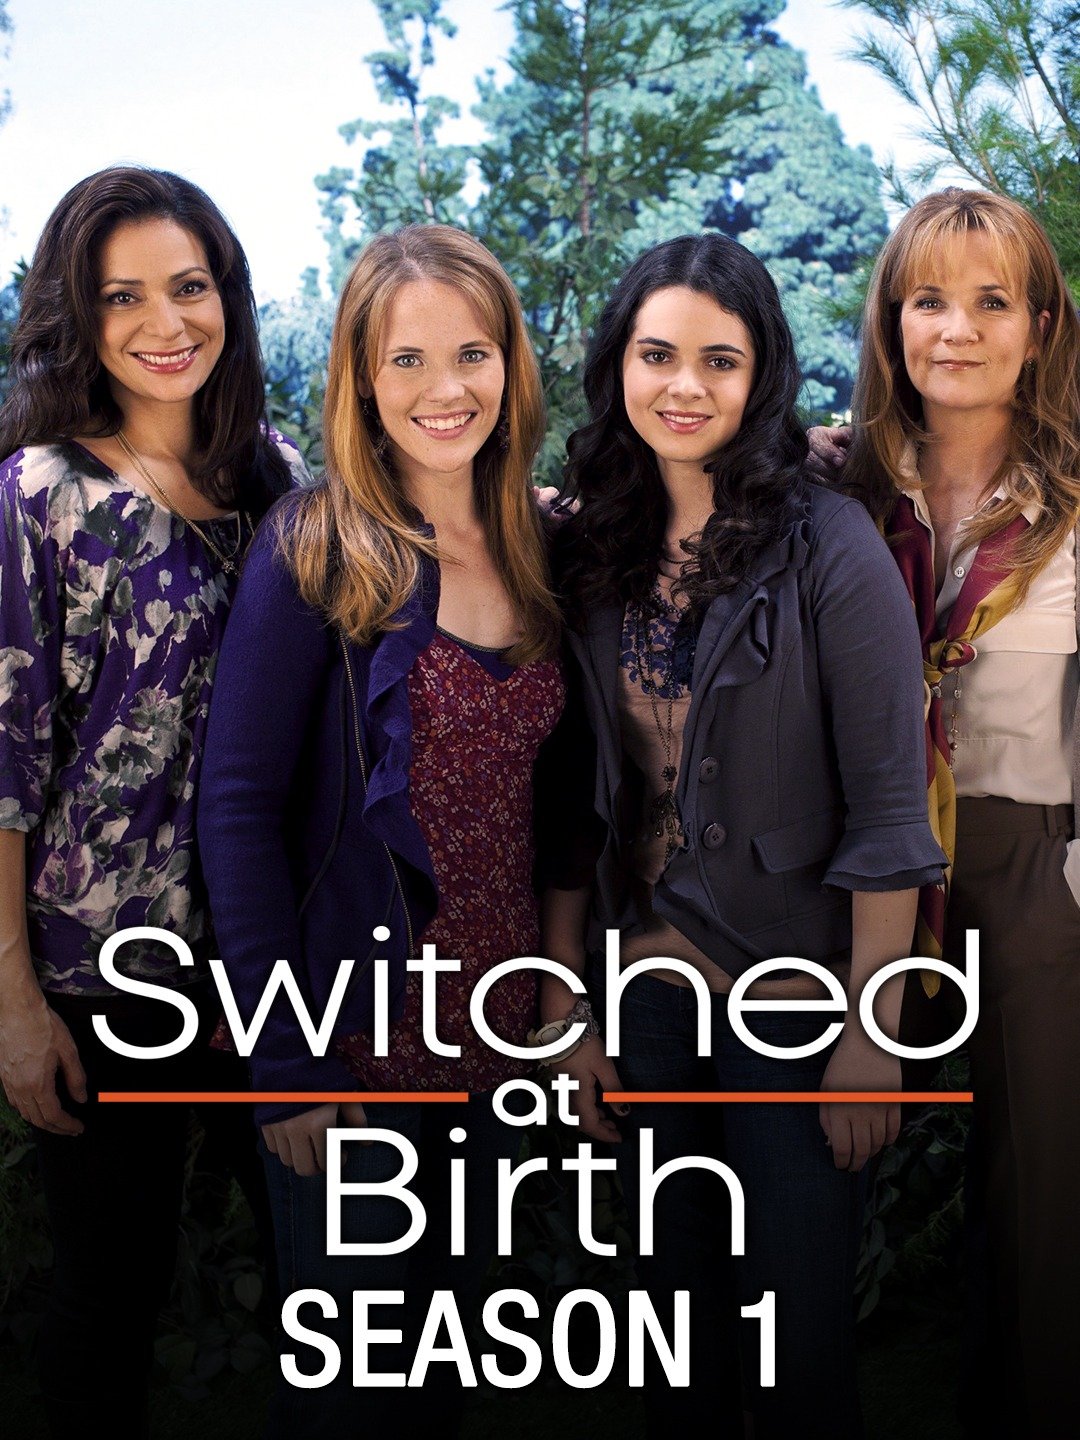 switched at birth season 3 episode 1 full episode